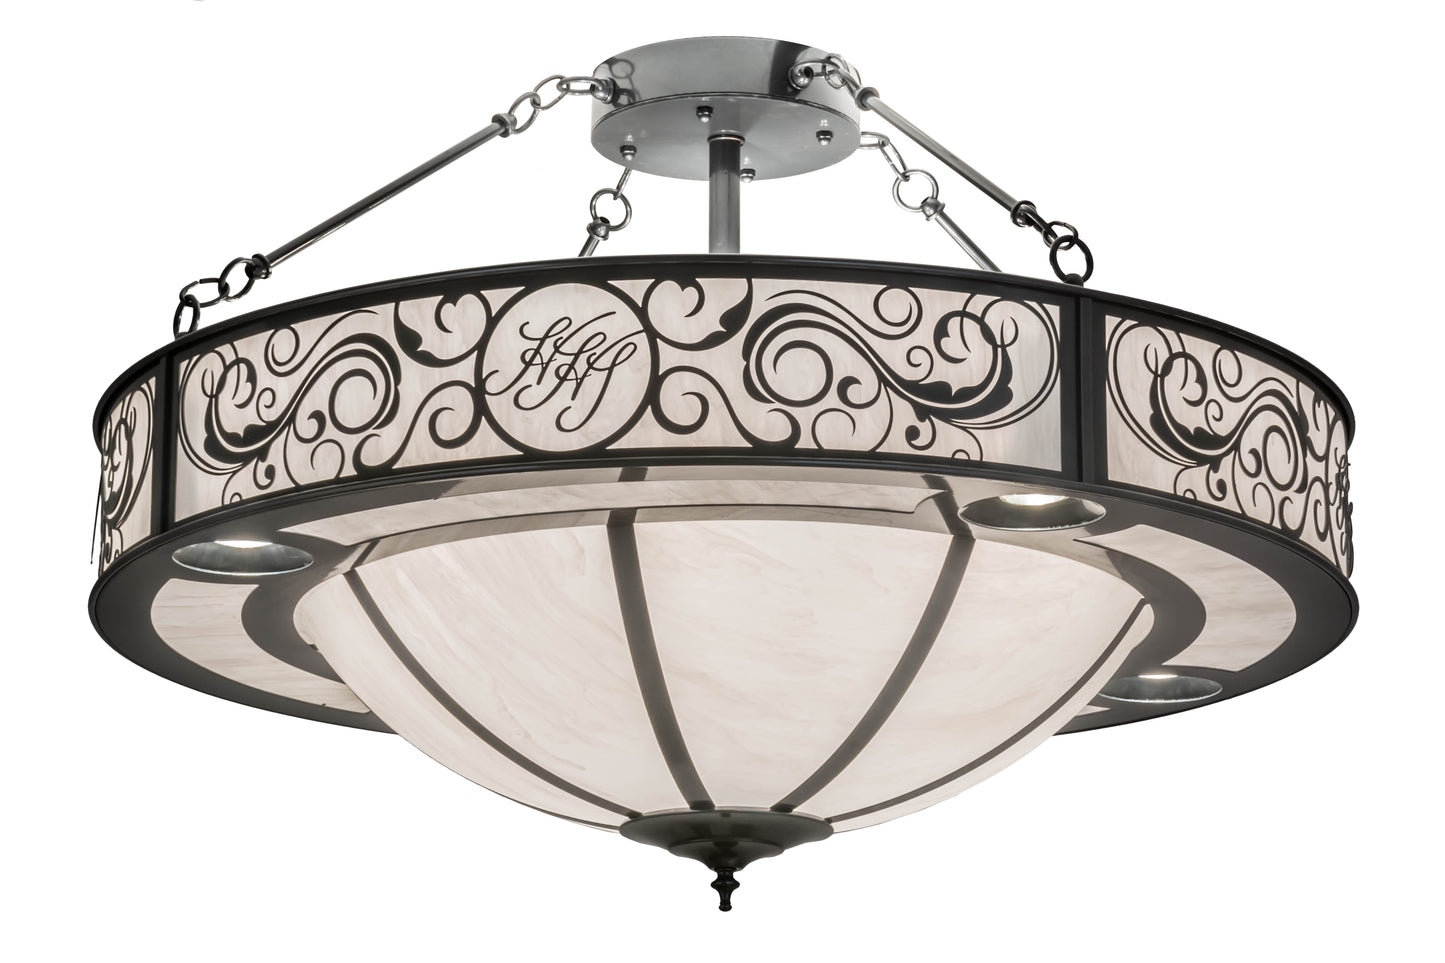 36" Toulouse Personalized Monogram Inverted Pendant by 2nd Ave Lighting